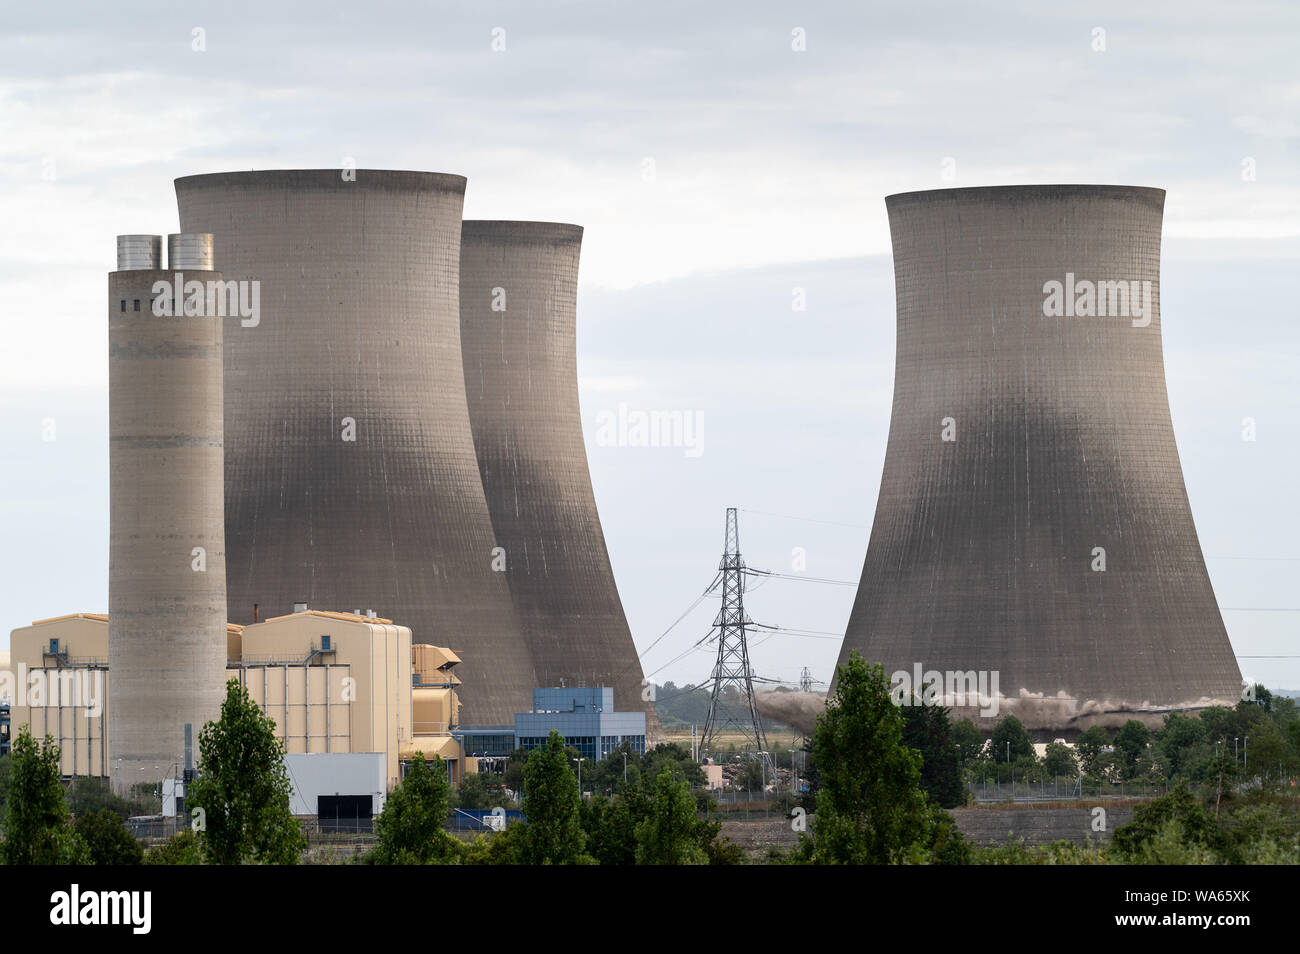 Didcot, Oxfordshire, UK. 18th Aug, 2019. The last three cooling towers are demolished with controlled explosions. Andrew Walmsley/Alamy Live News Credit: Andrew Walmsley/Alamy Live News Stock Photo